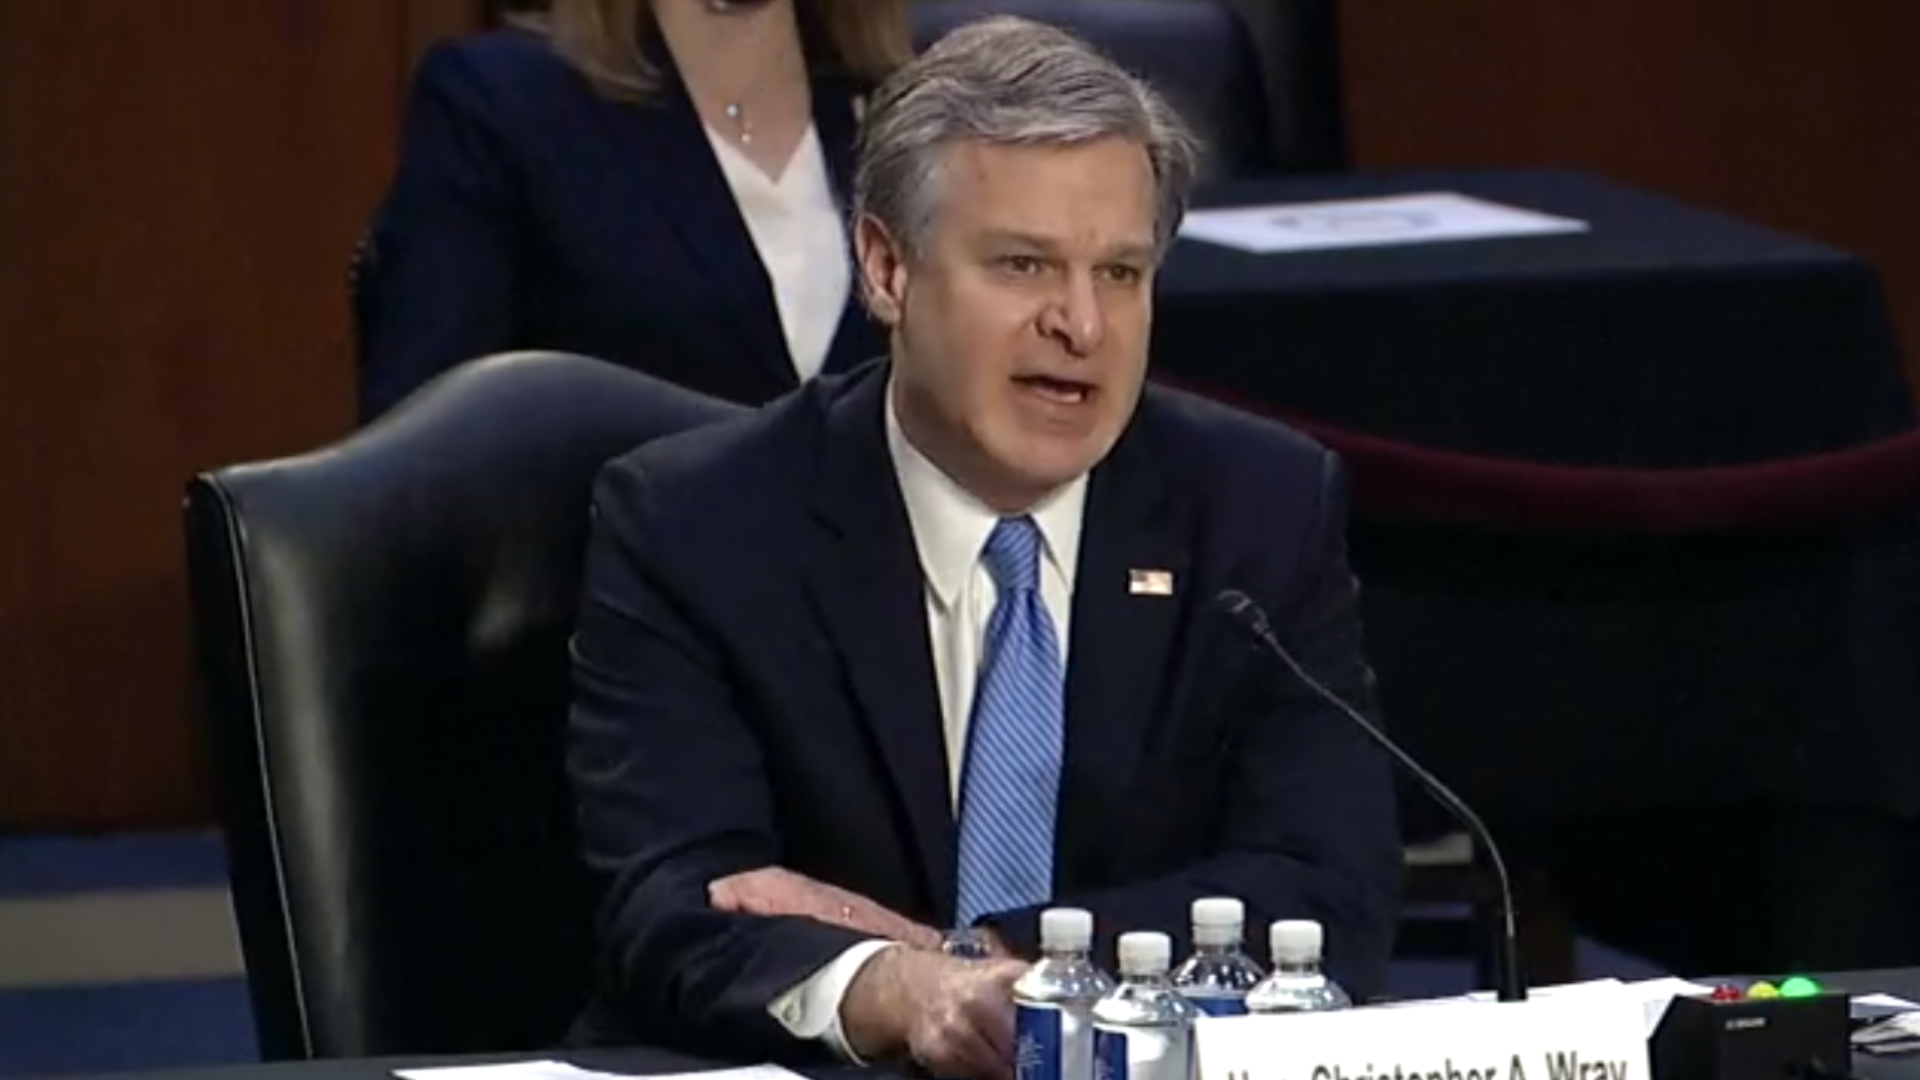 FBI Director Christopher Wray, in Hill testimony, had to defend the way the Bureau handled intelligence reports leading up to the Capitol insurrection.